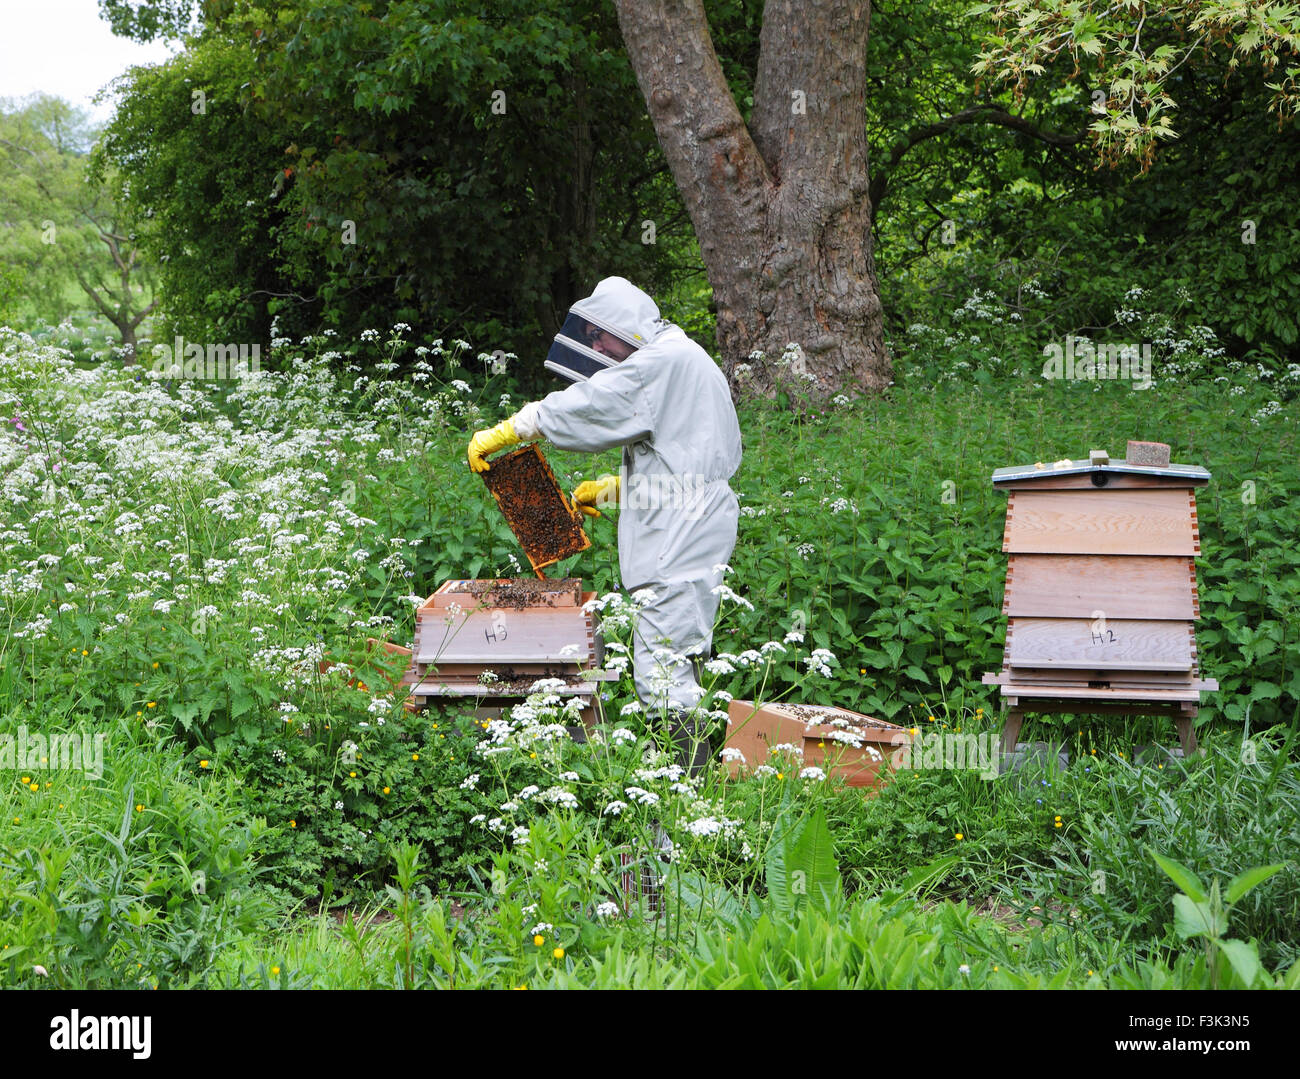 Beekeeper in protective clothing collecting Honey from a Hive Stock Photo